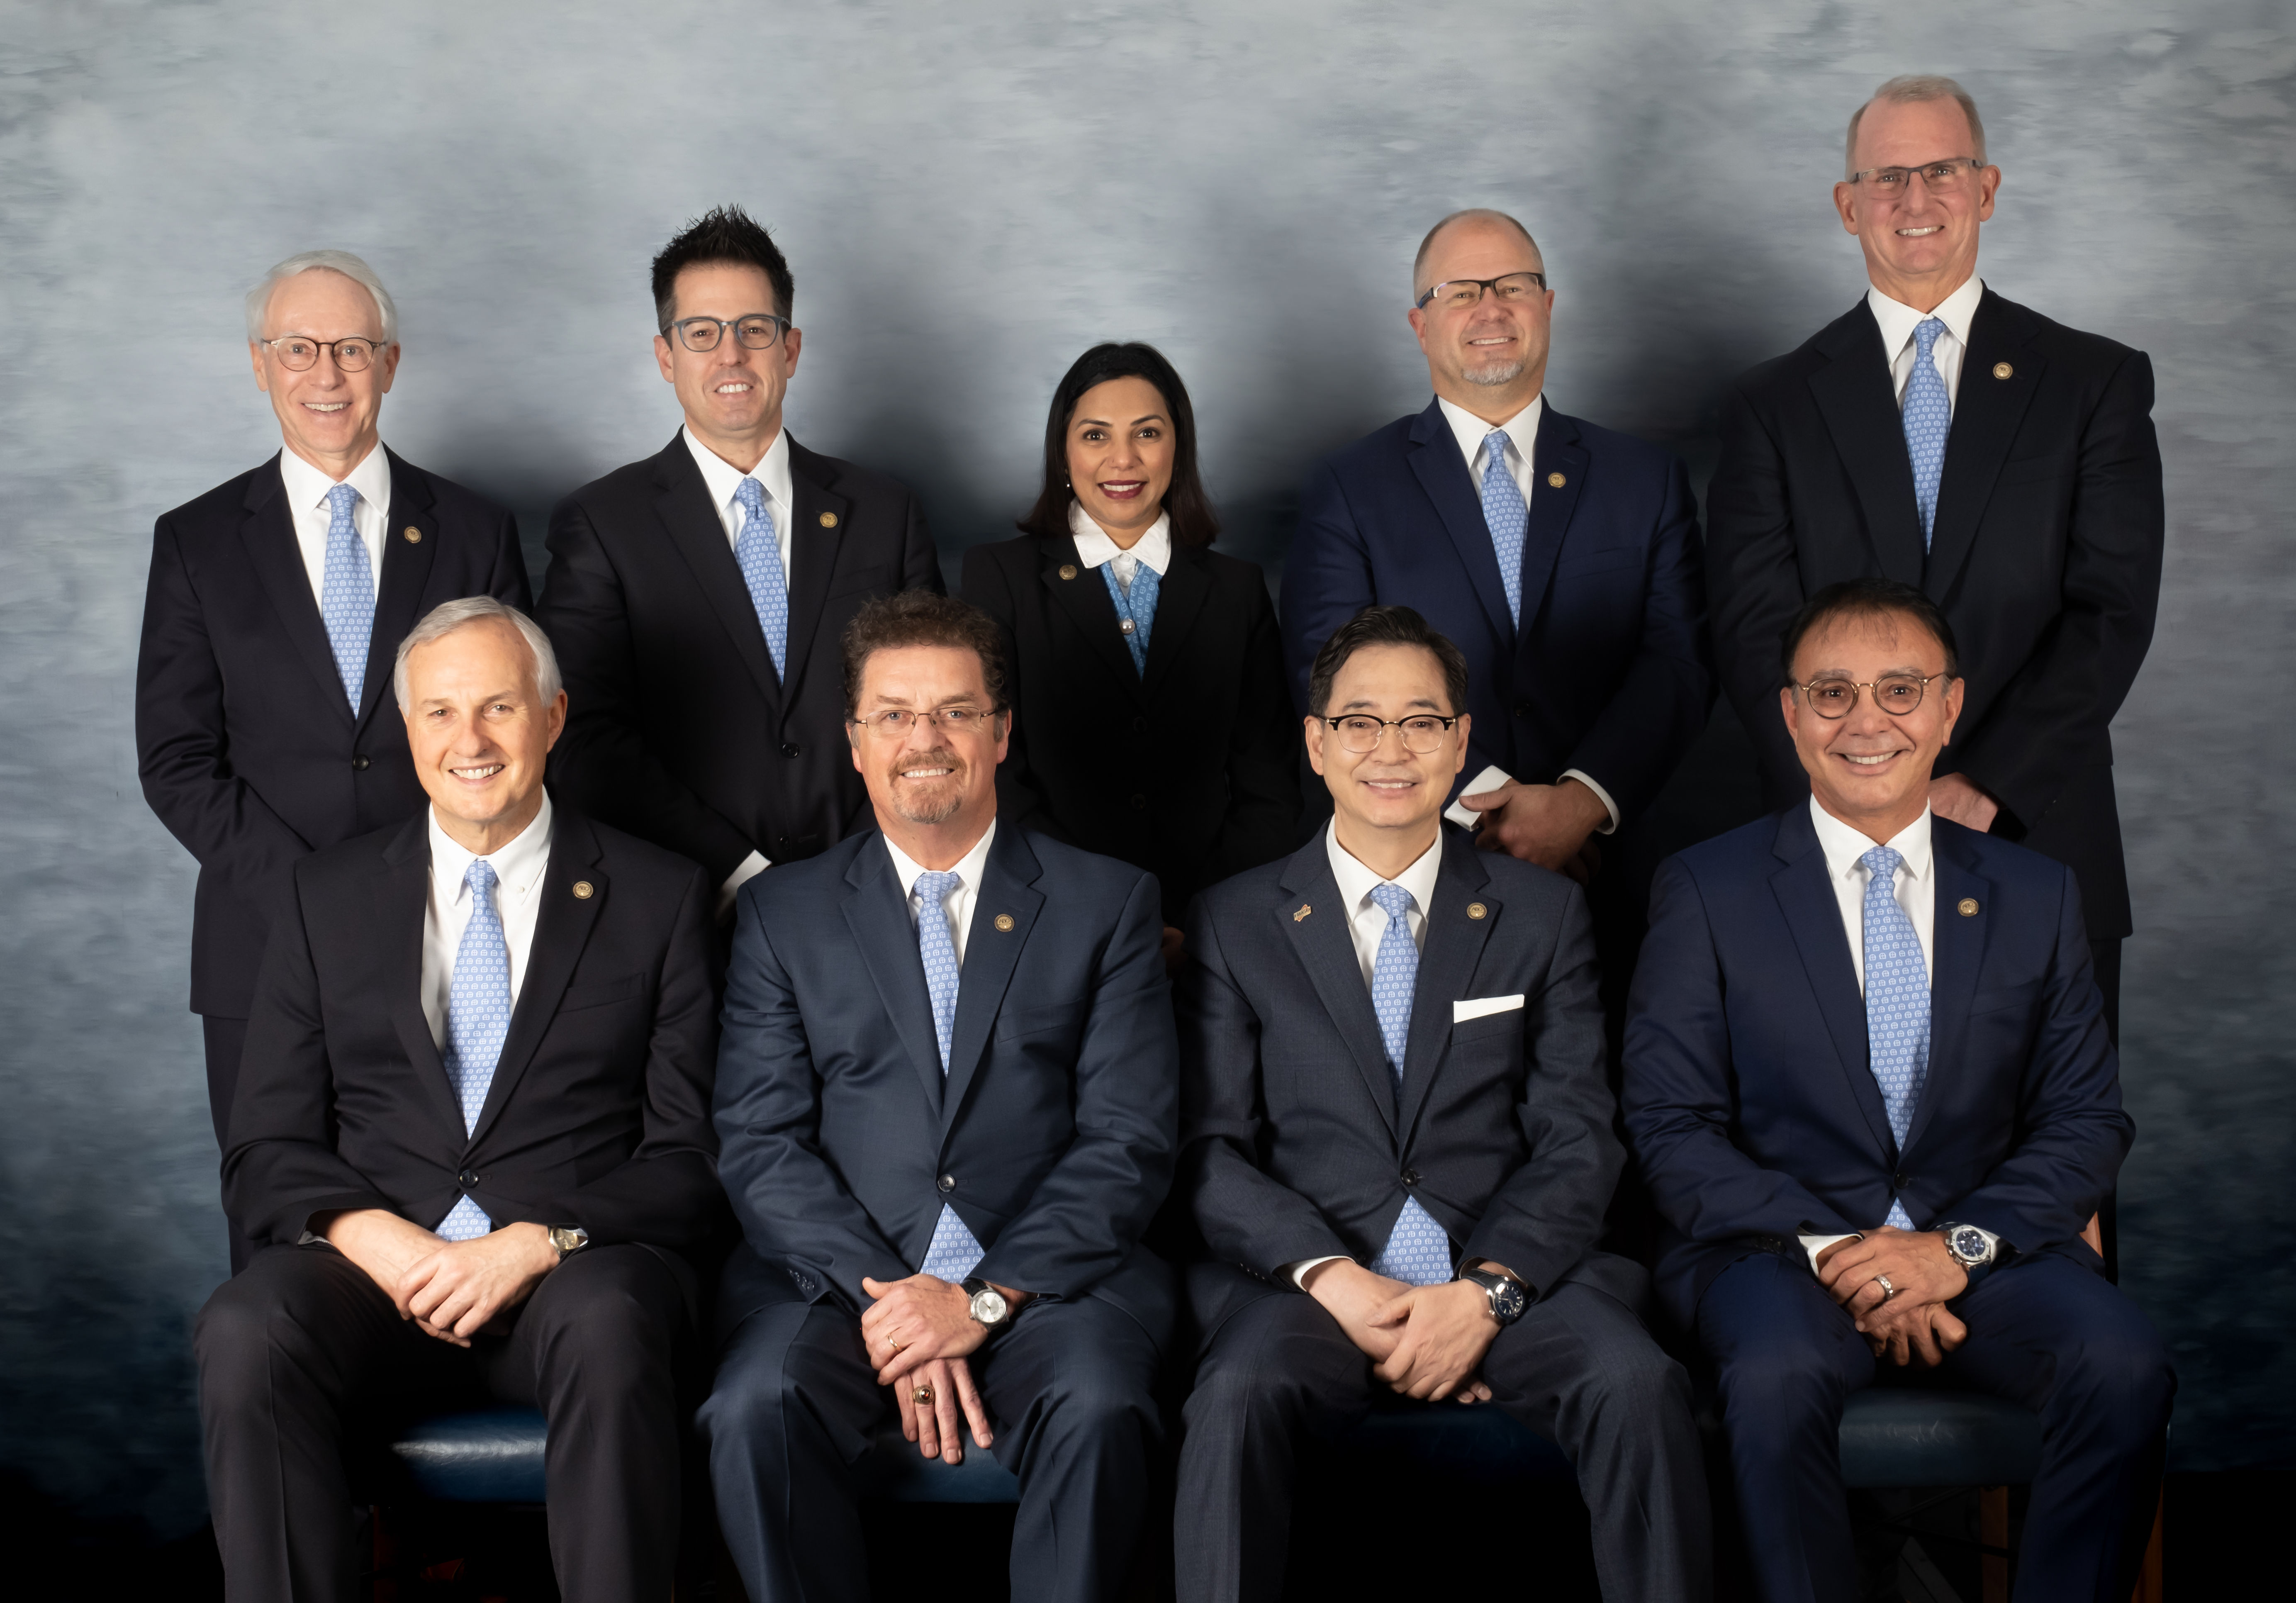 well-lit photo of 8 people wearing blue suits. There are 5 standing in a row behind 4 sitting in chairs.